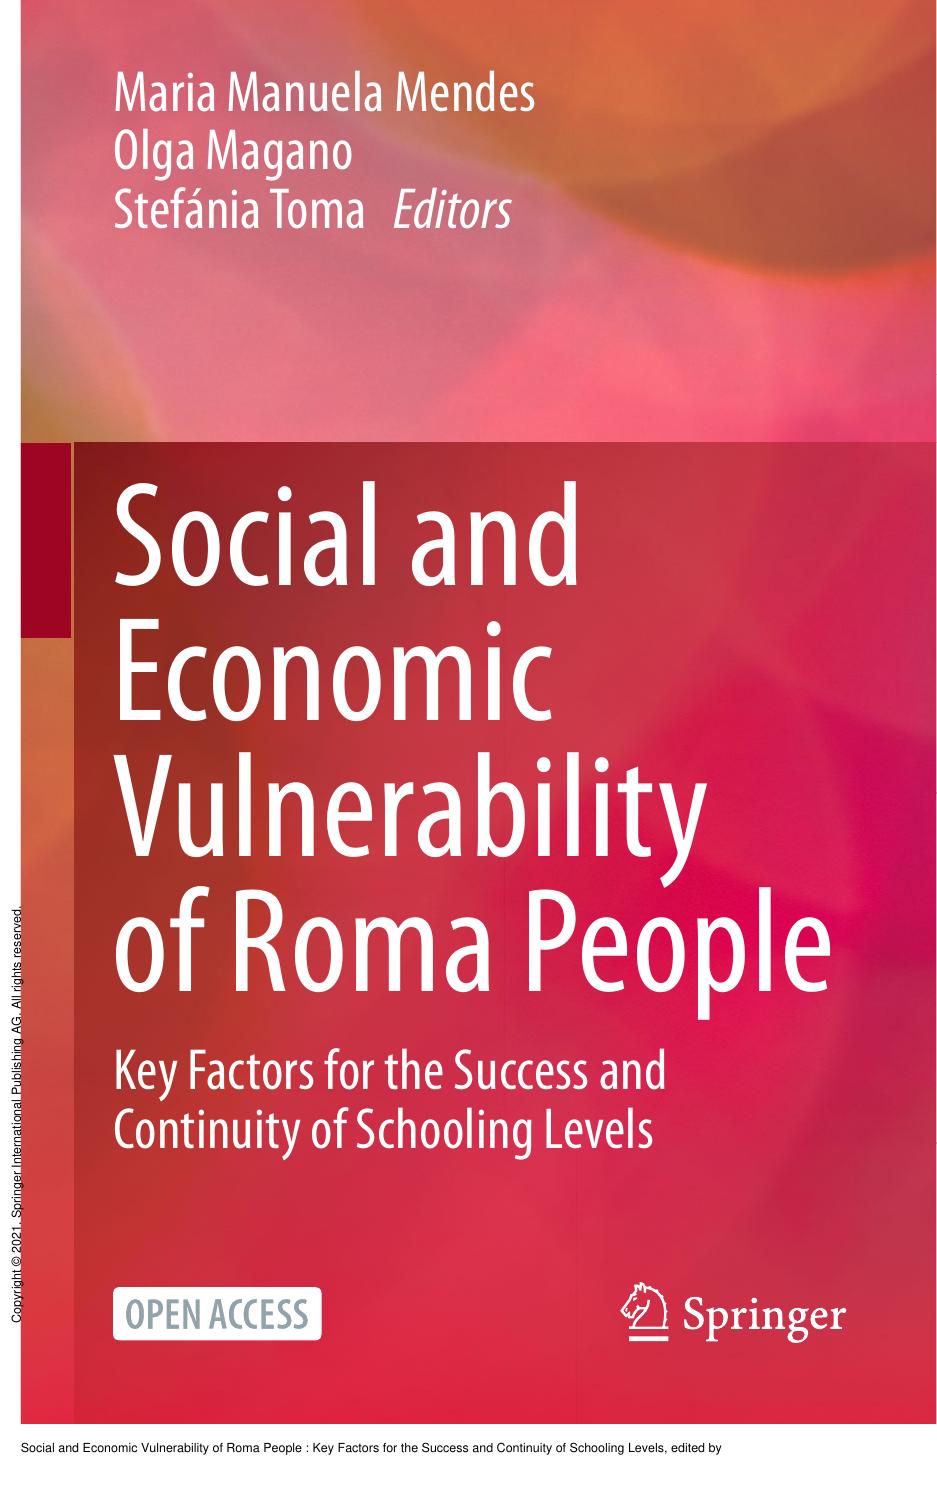 Social and Economic Vulnerability of Roma People : Key Factors for the Success and Continuity of Schooling Levels by Maria Manuela Mendes; Olga Magano; Stefánia Toma